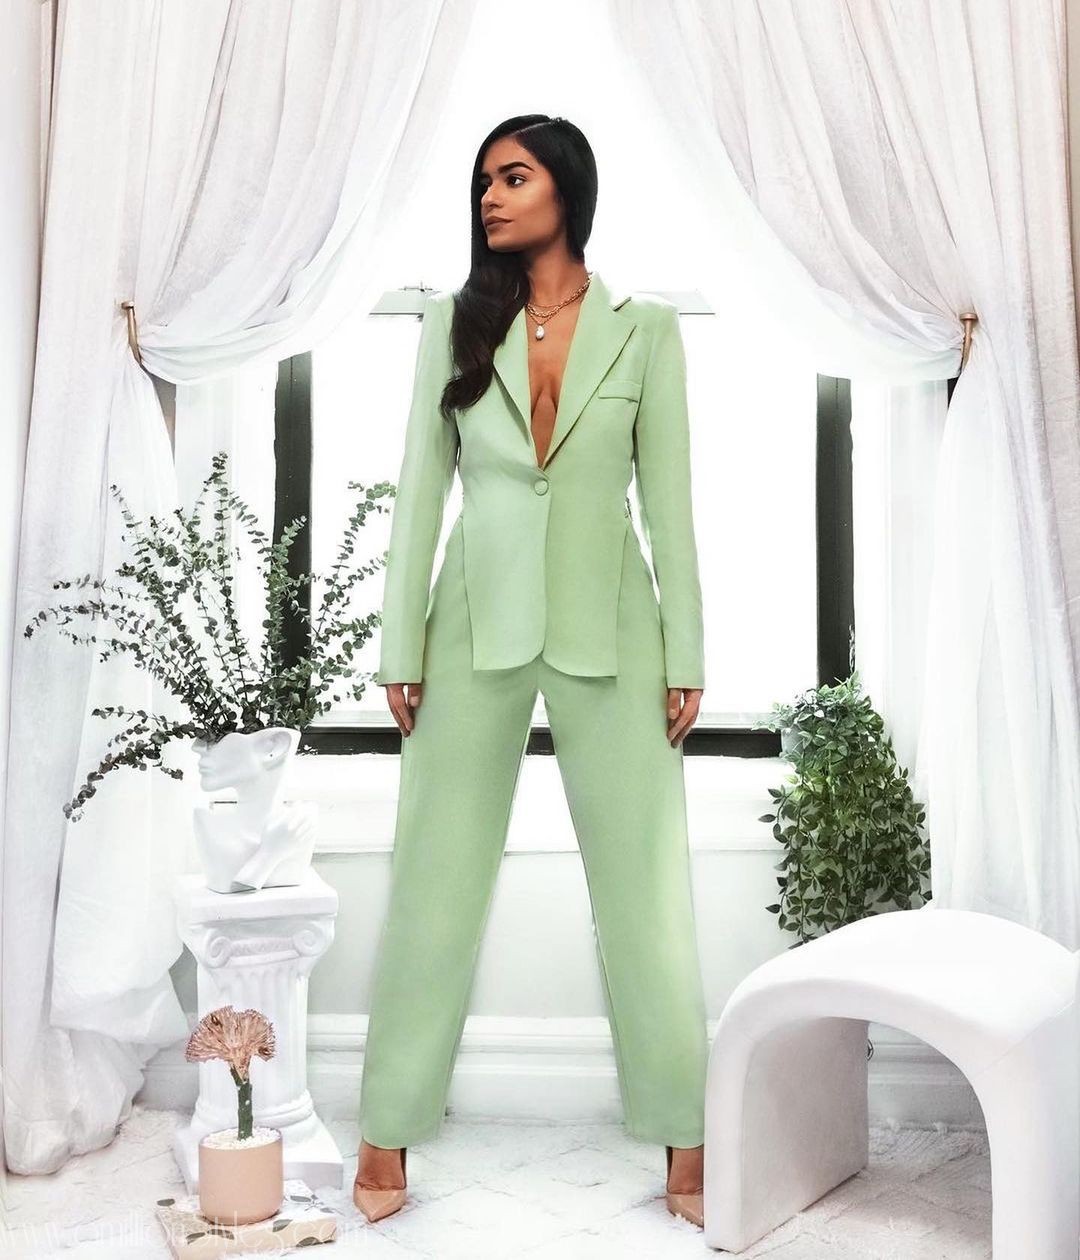 12 Stylish Women's Casual Suits To Kick Off The Day